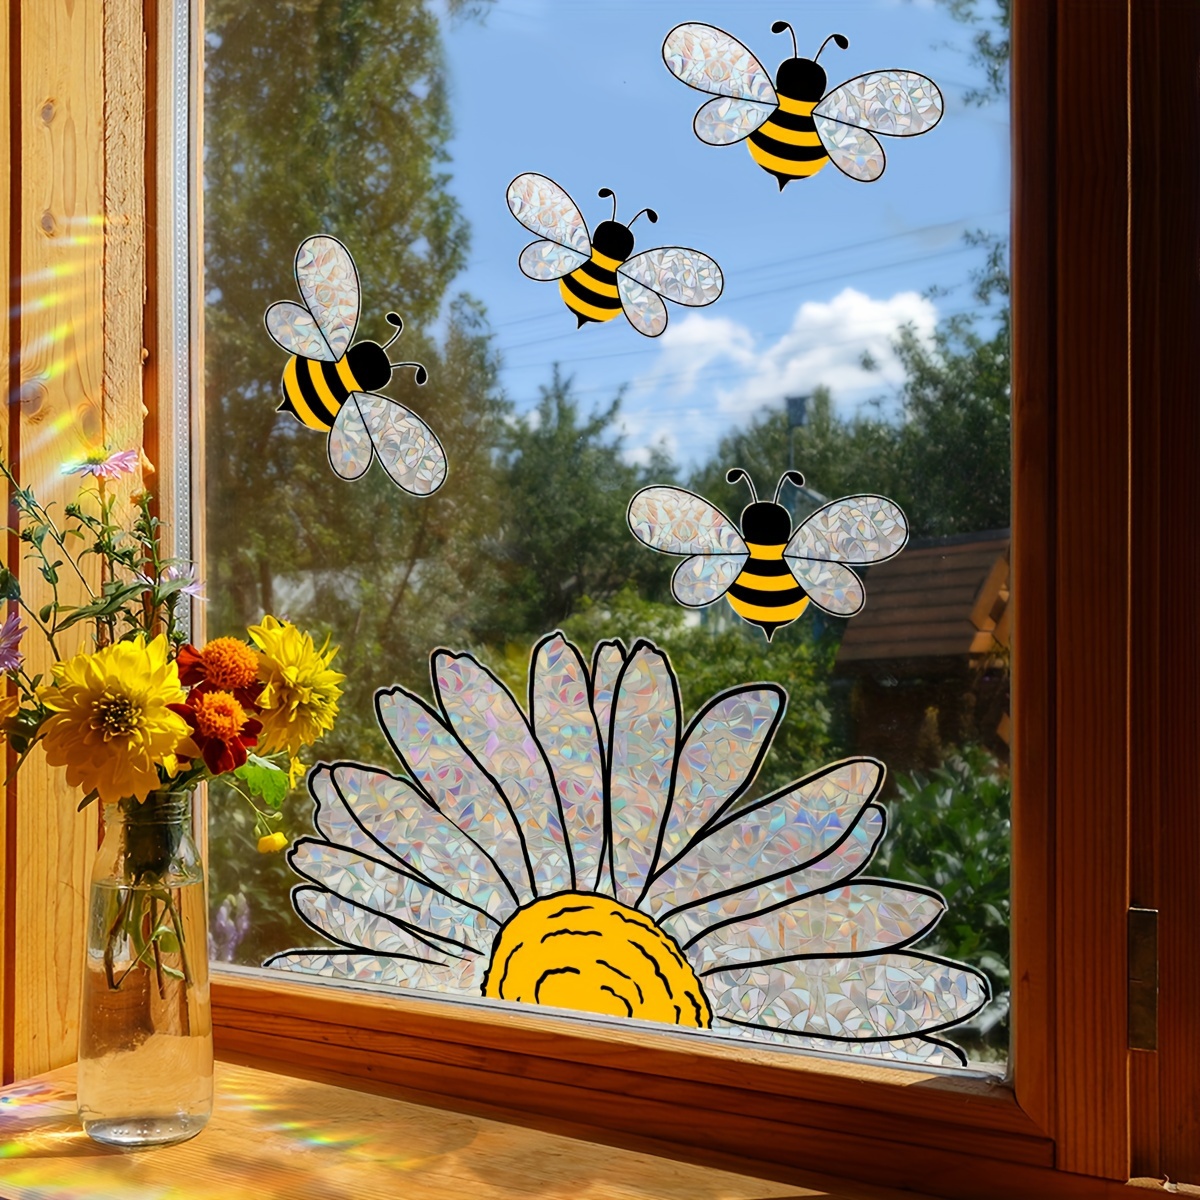 

1pc Sunflower Bees Static Window Cling, Colorful Plastic Decorative Sticker, Glass Wall Beautification Decal For Home & Room Decor, Non-adhesive Transparent Film For Window Display